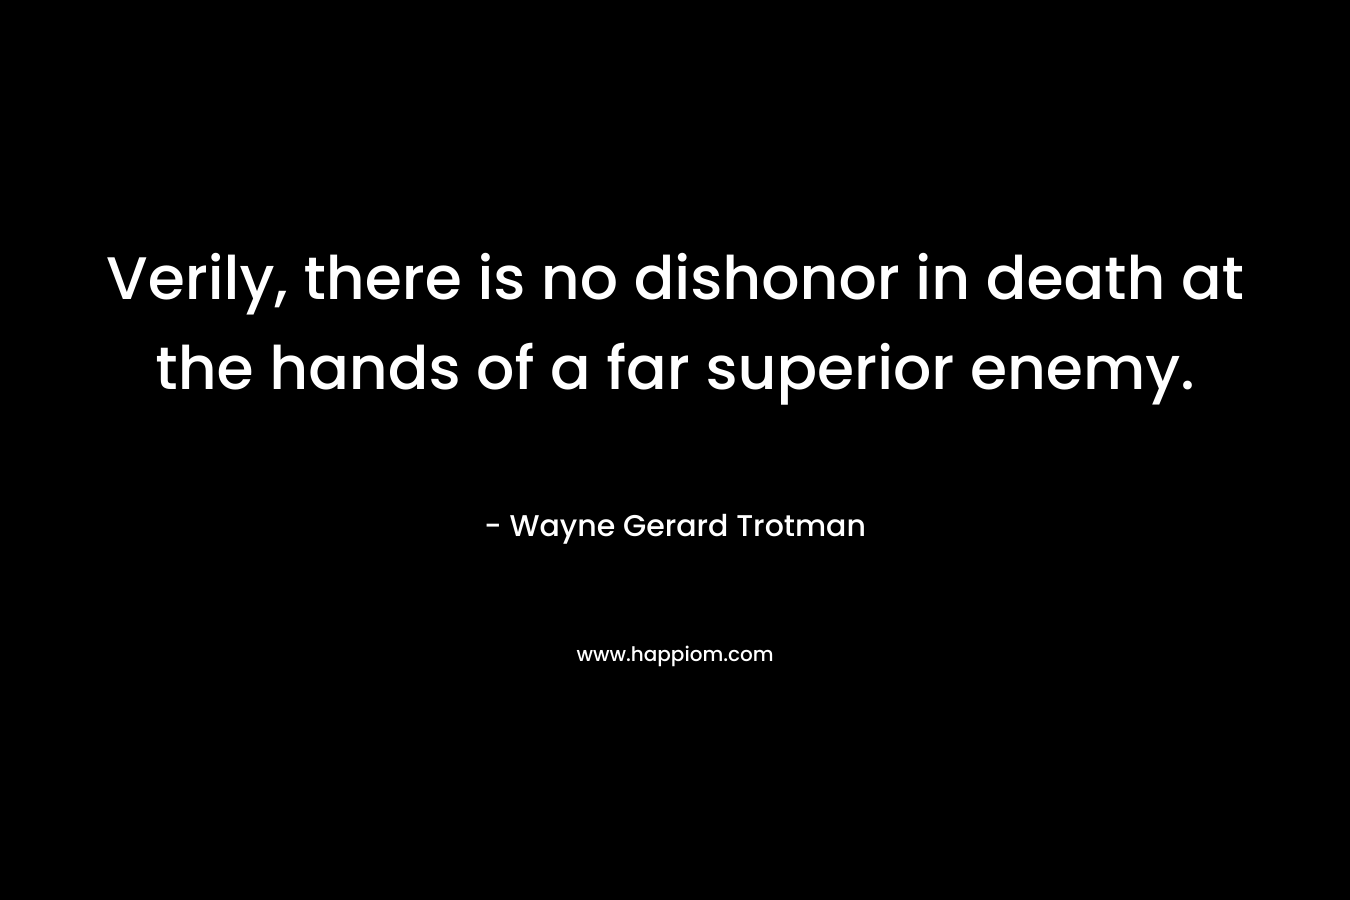 Verily, there is no dishonor in death at the hands of a far superior enemy. – Wayne Gerard Trotman